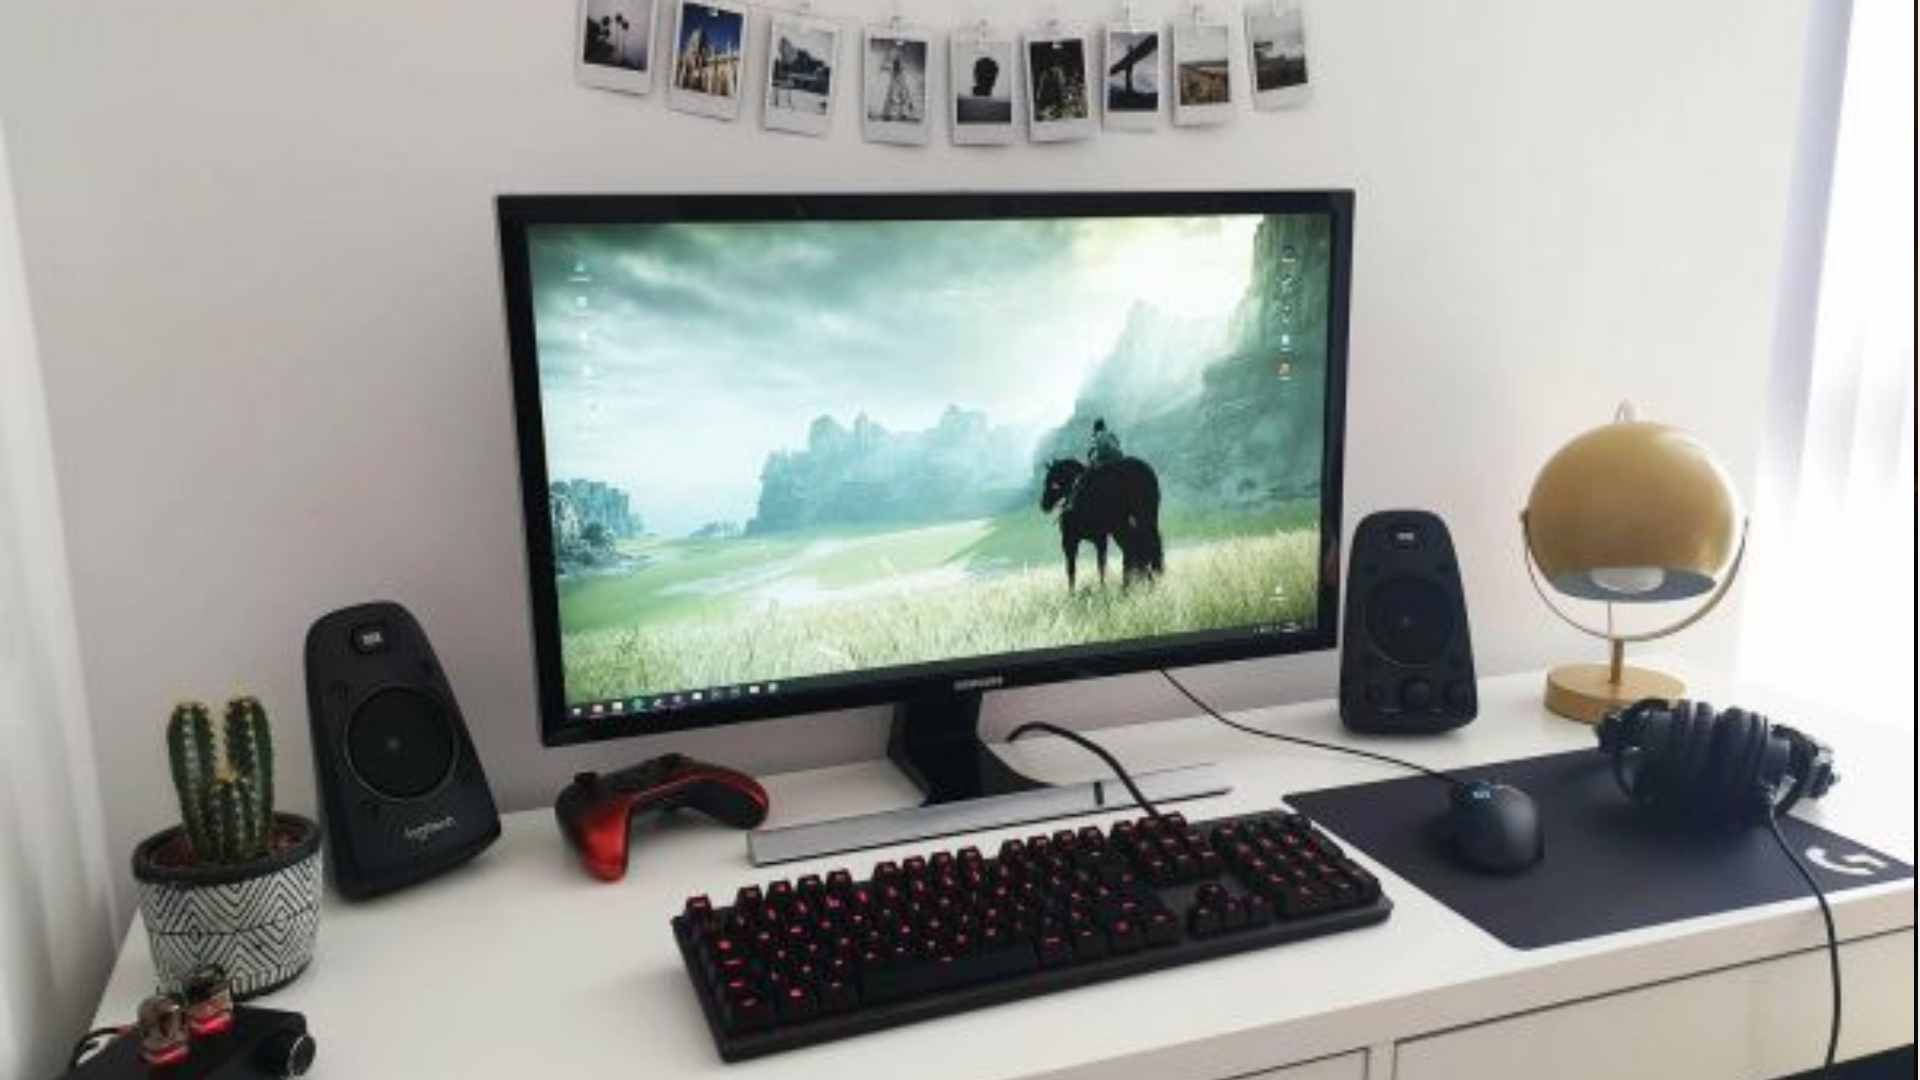 lont worm barst The PC Gamer team's personal gaming setups | PC Gamer